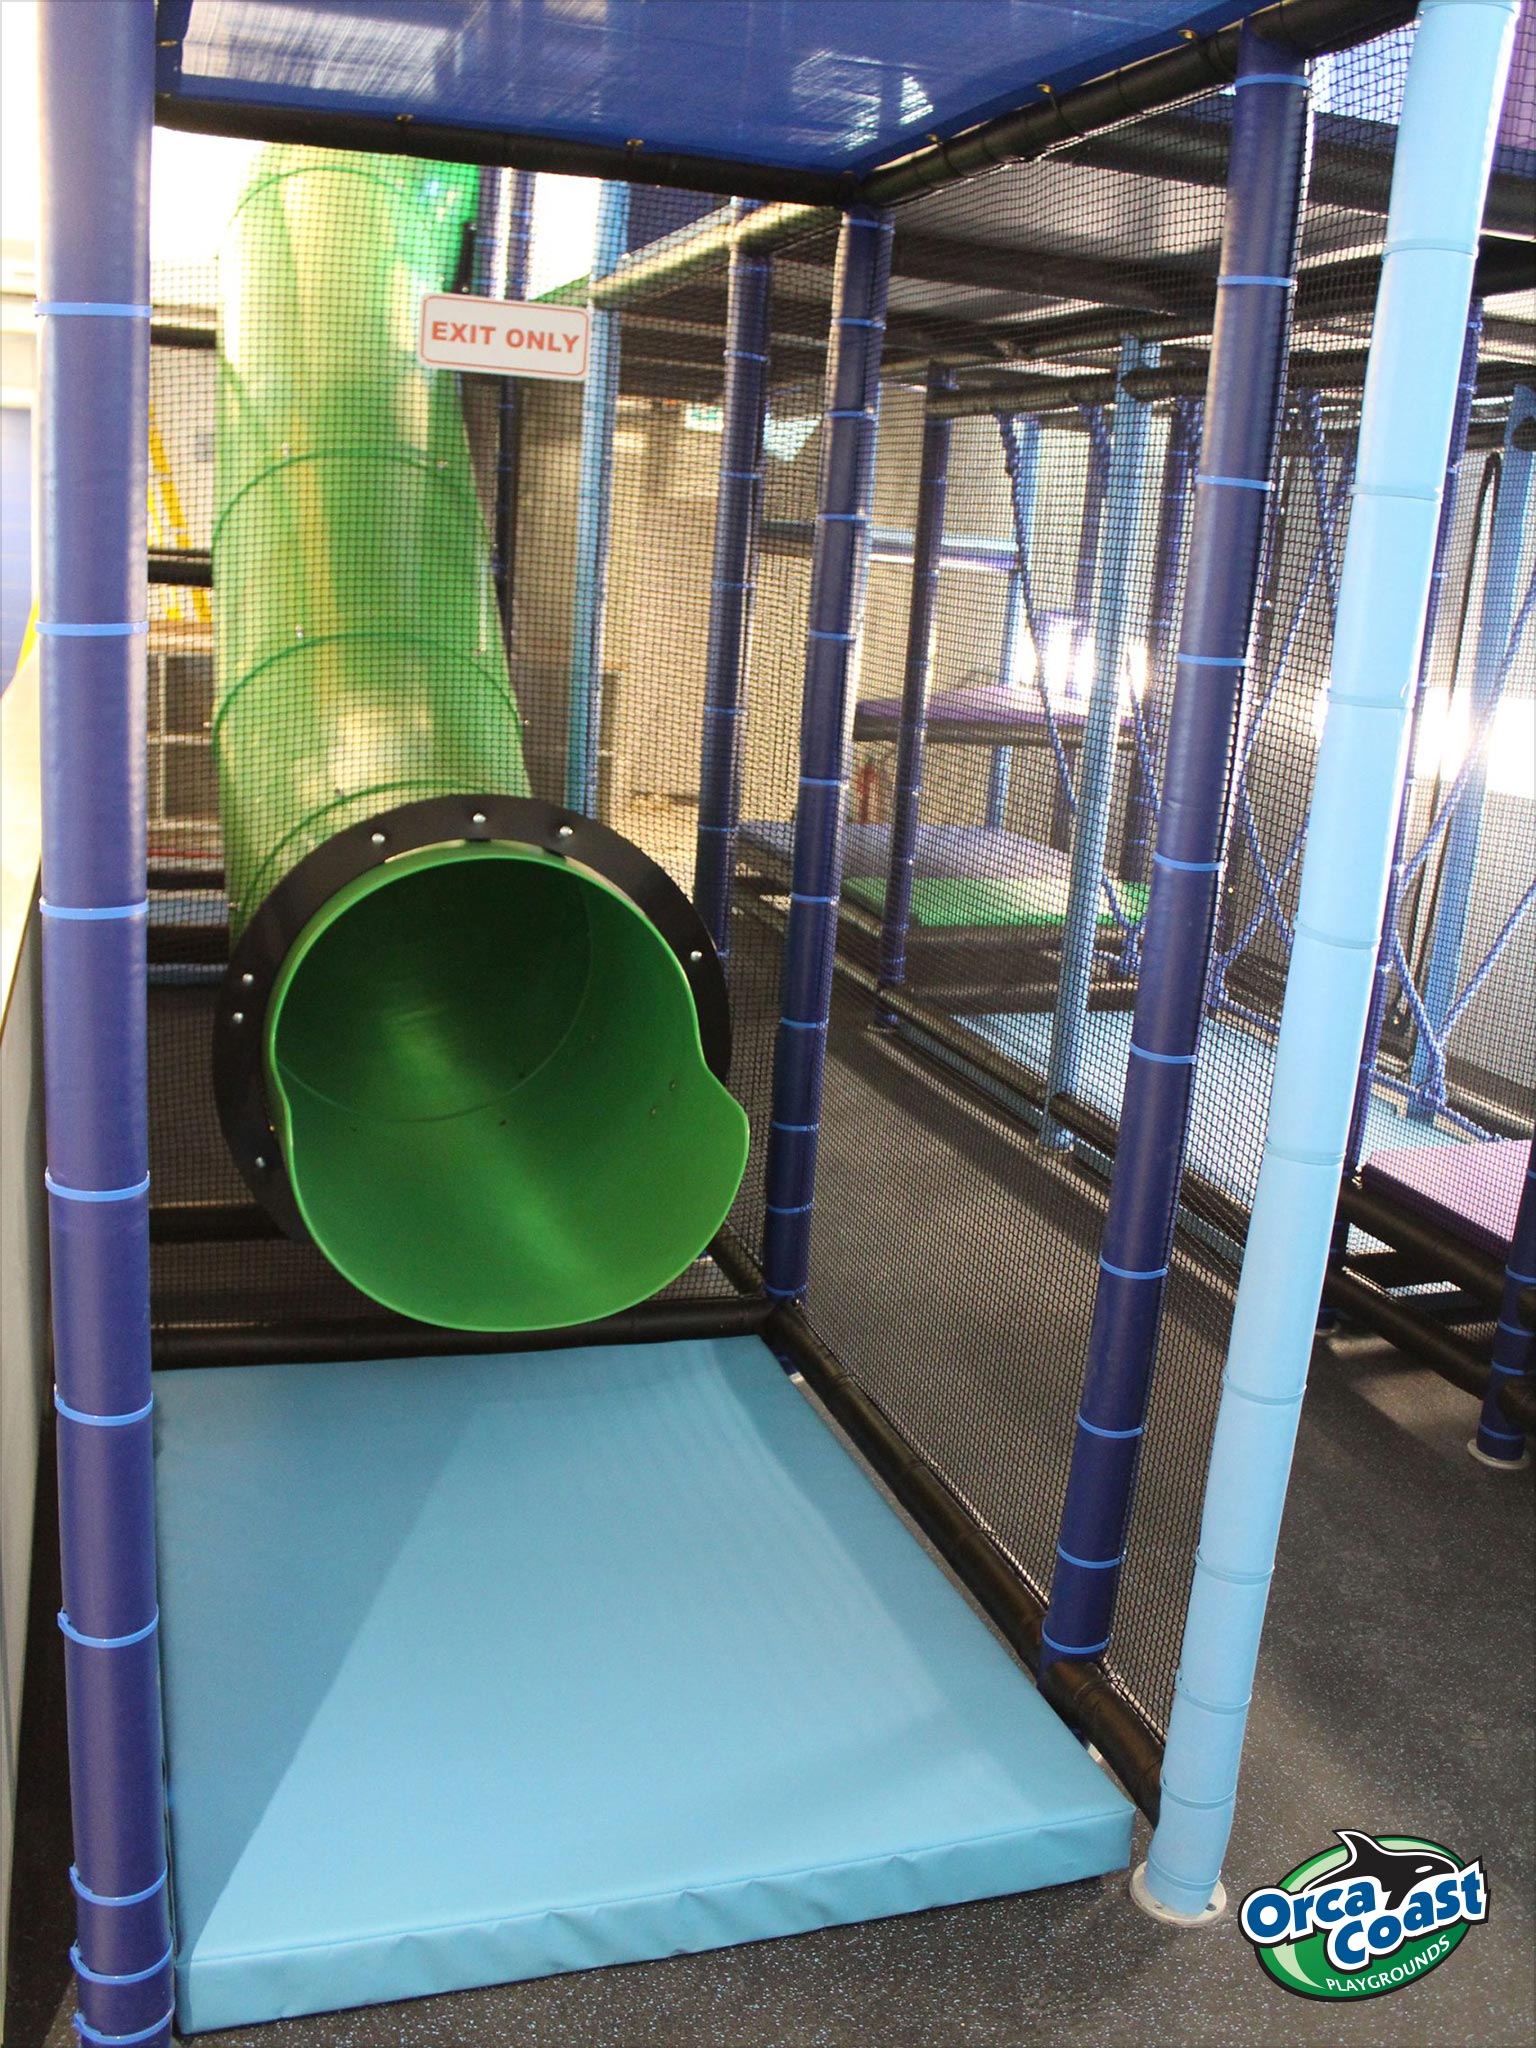 Town of Gillam indoor playground manufactured by Orca Coast Playground Ltd.